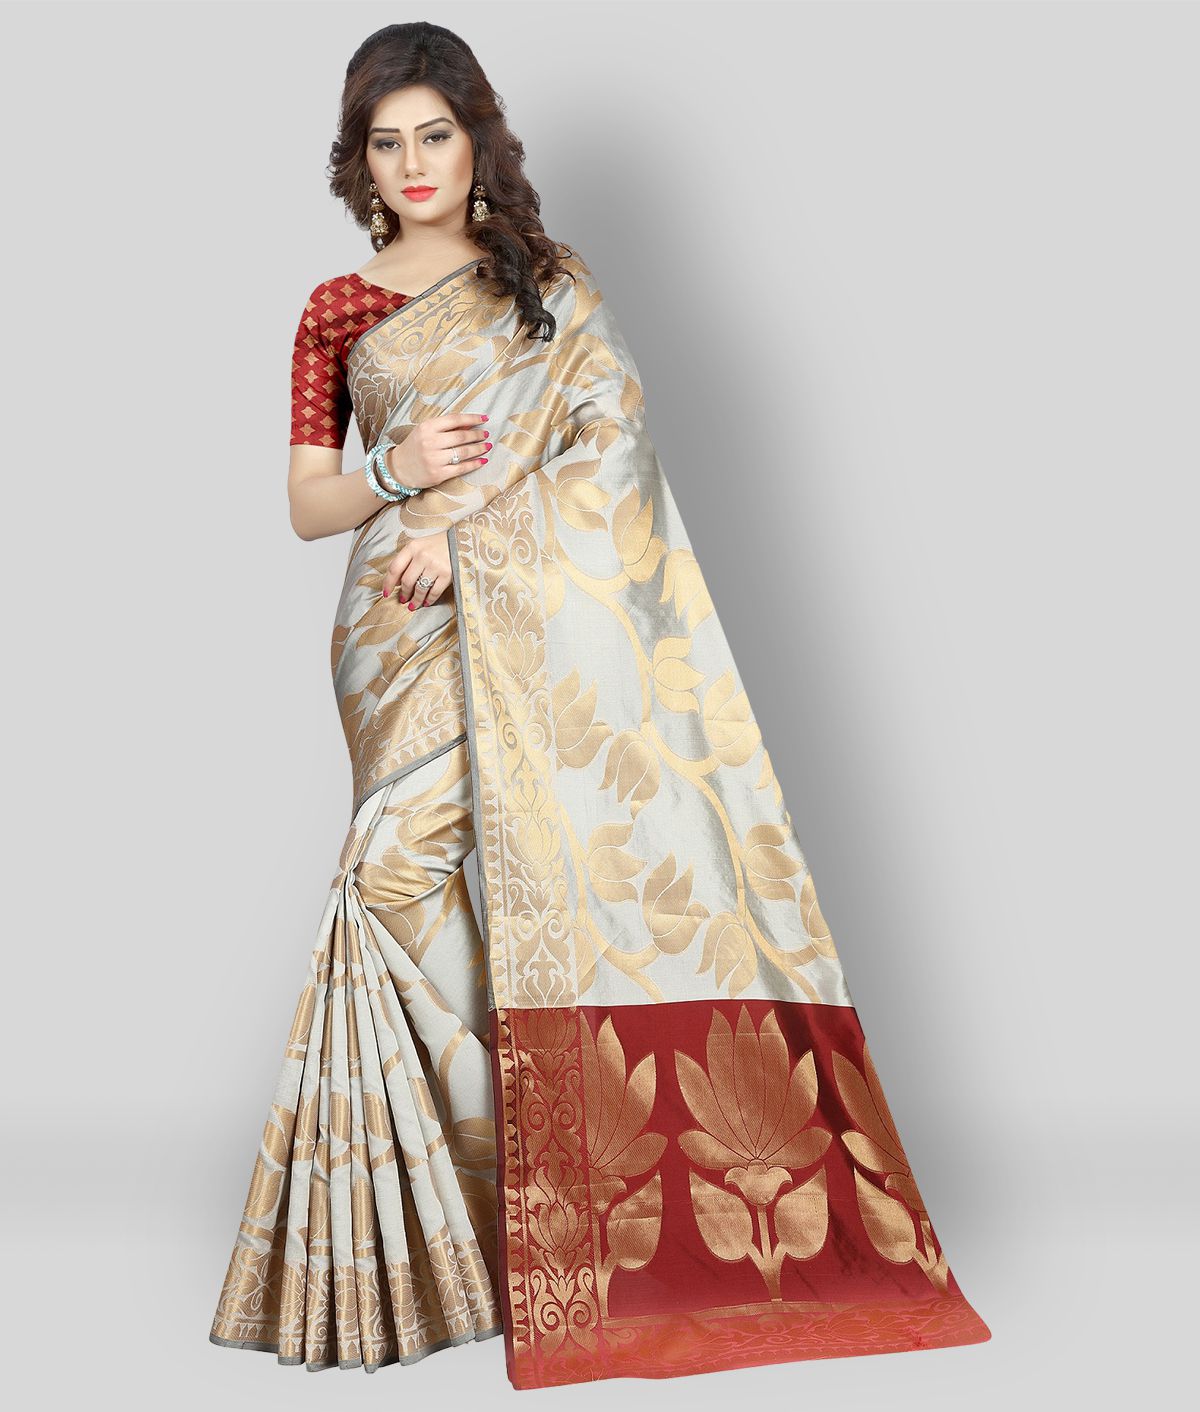 Gazal Fashions - Multicolor Silk Saree With Blouse Piece (Pack of 1)